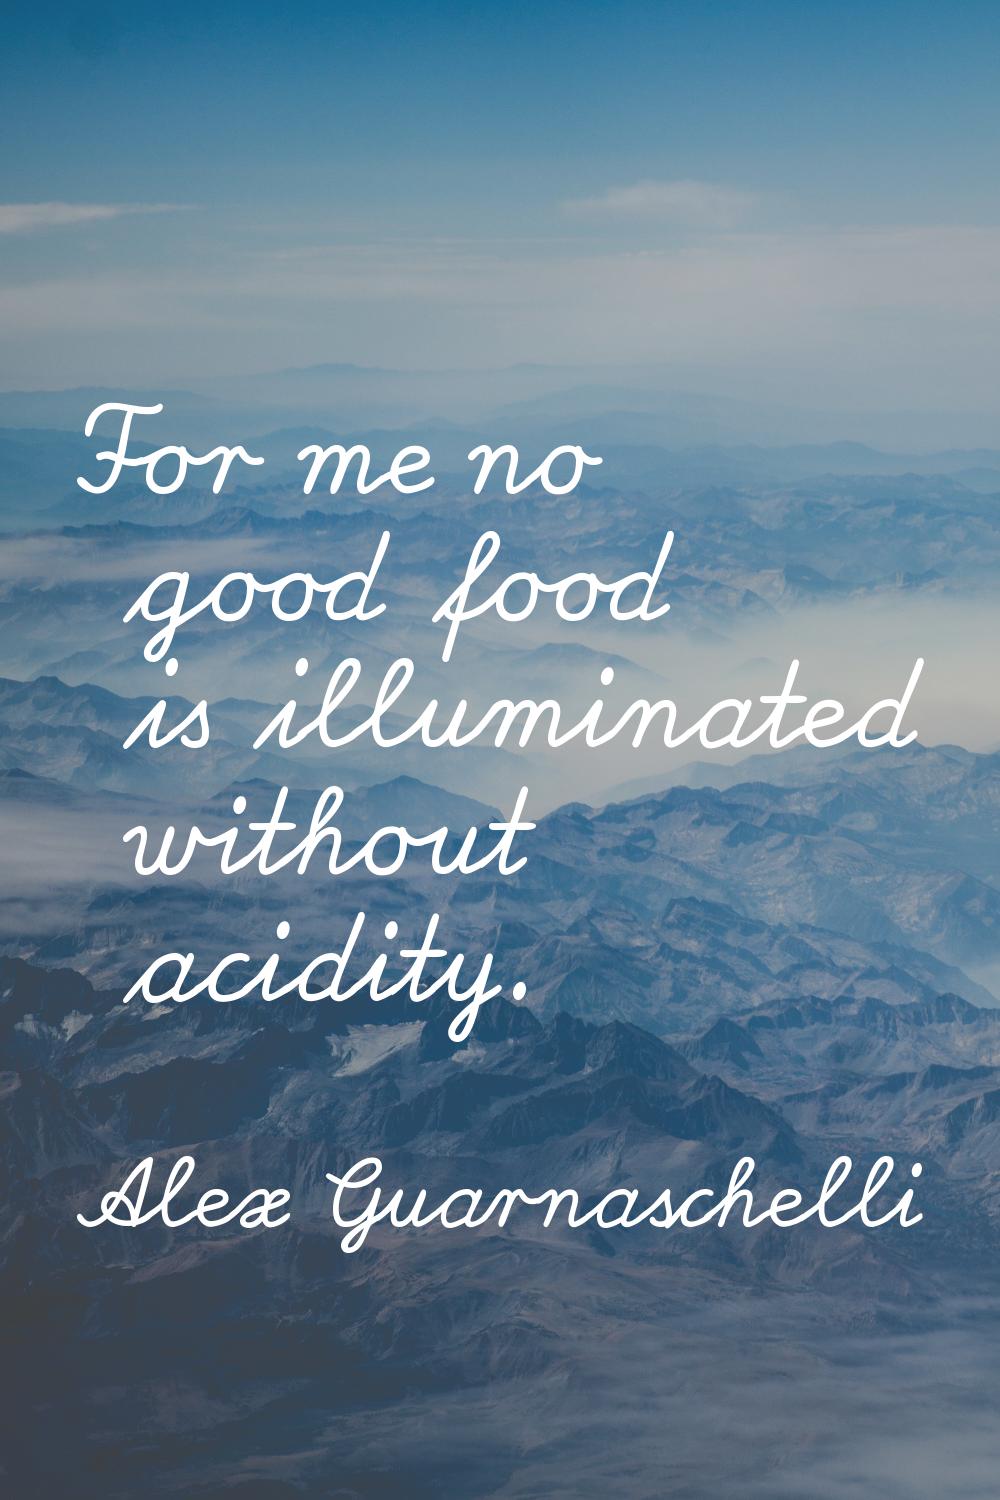 For me no good food is illuminated without acidity.